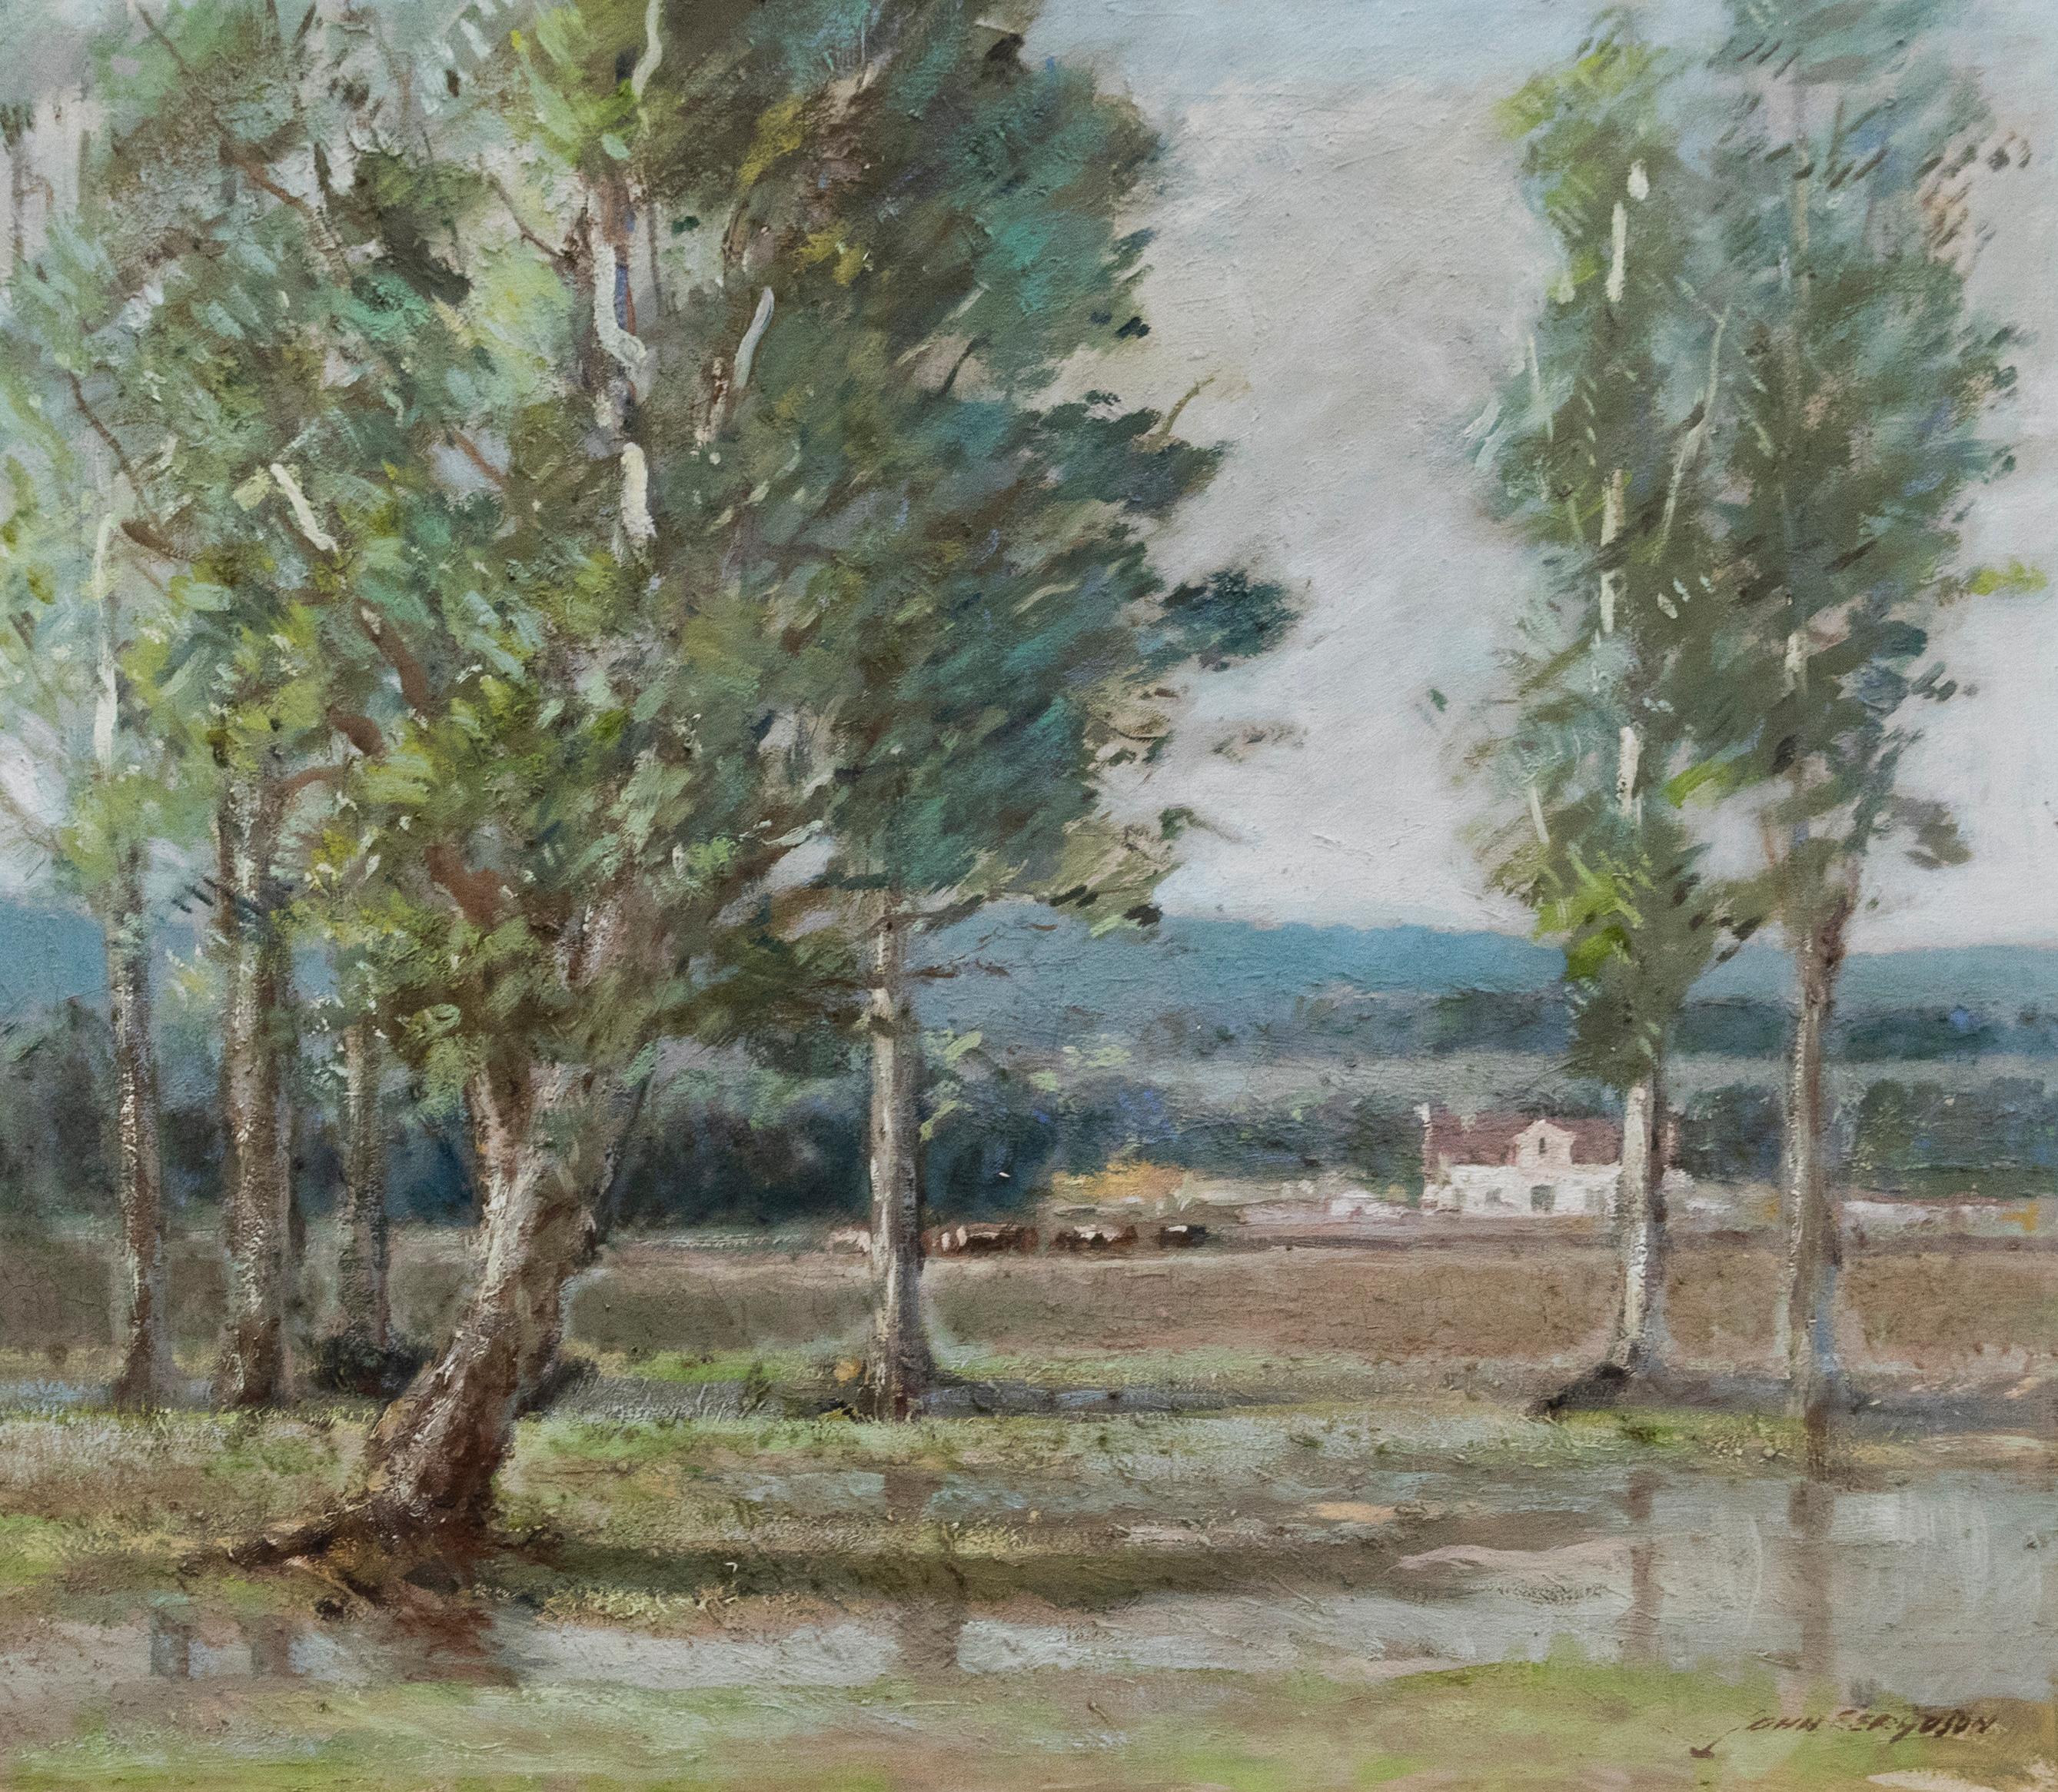 A wonderful impressionistic painting by listed South African artist John Kenneth Ferguson (1885-1967). The scene depicts an idyllic view over rural farmland with cattle grazing to the left of a large Cape Dutch farmhouse. In the foreground a grove